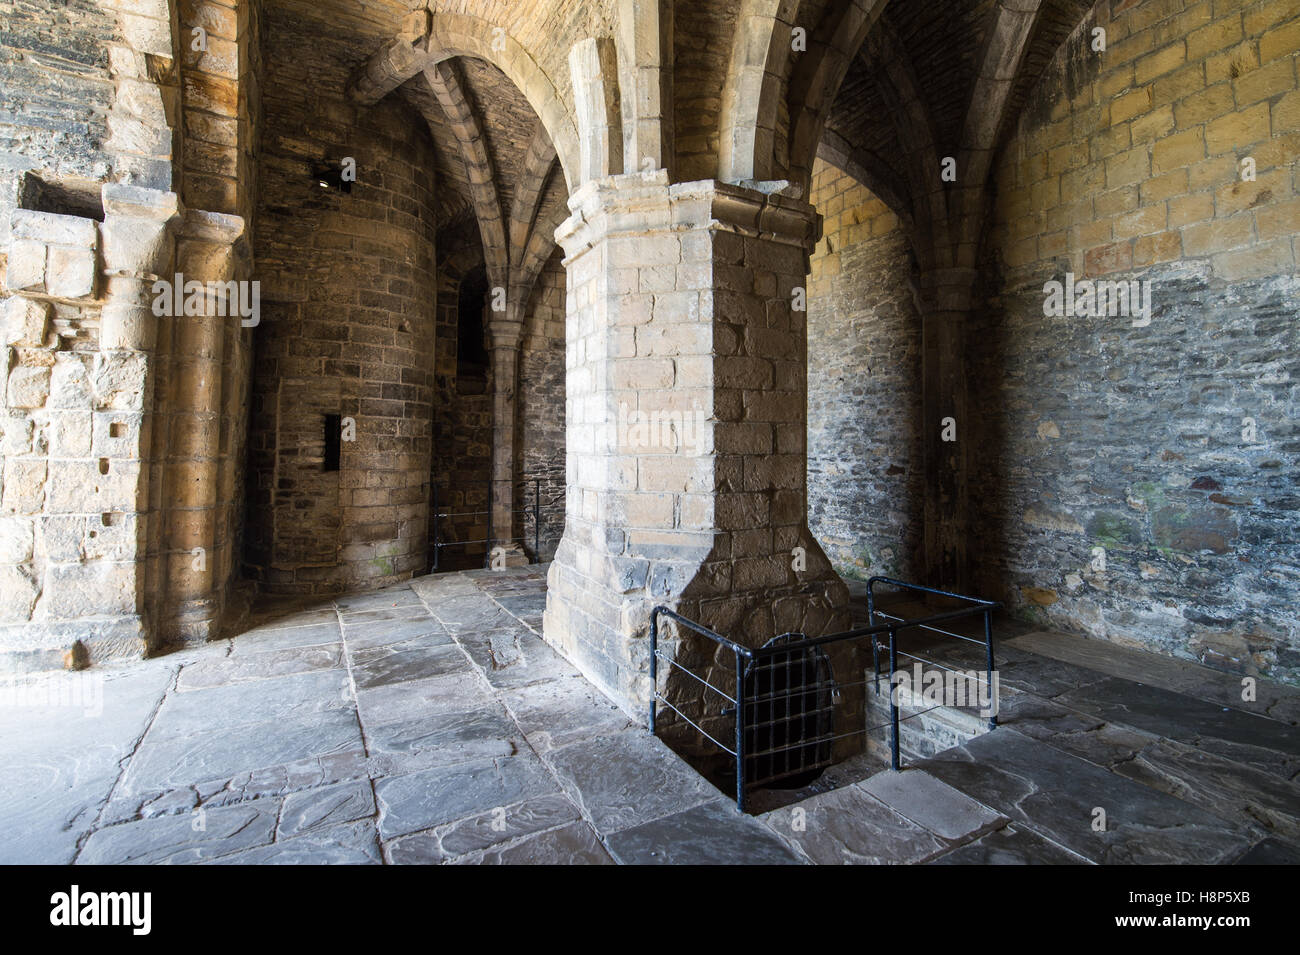 UK, England, Yorkshire, Richmond - The interior of the Richmond Castle, one of North Yorkshire's most popular tourist attraction Stock Photo